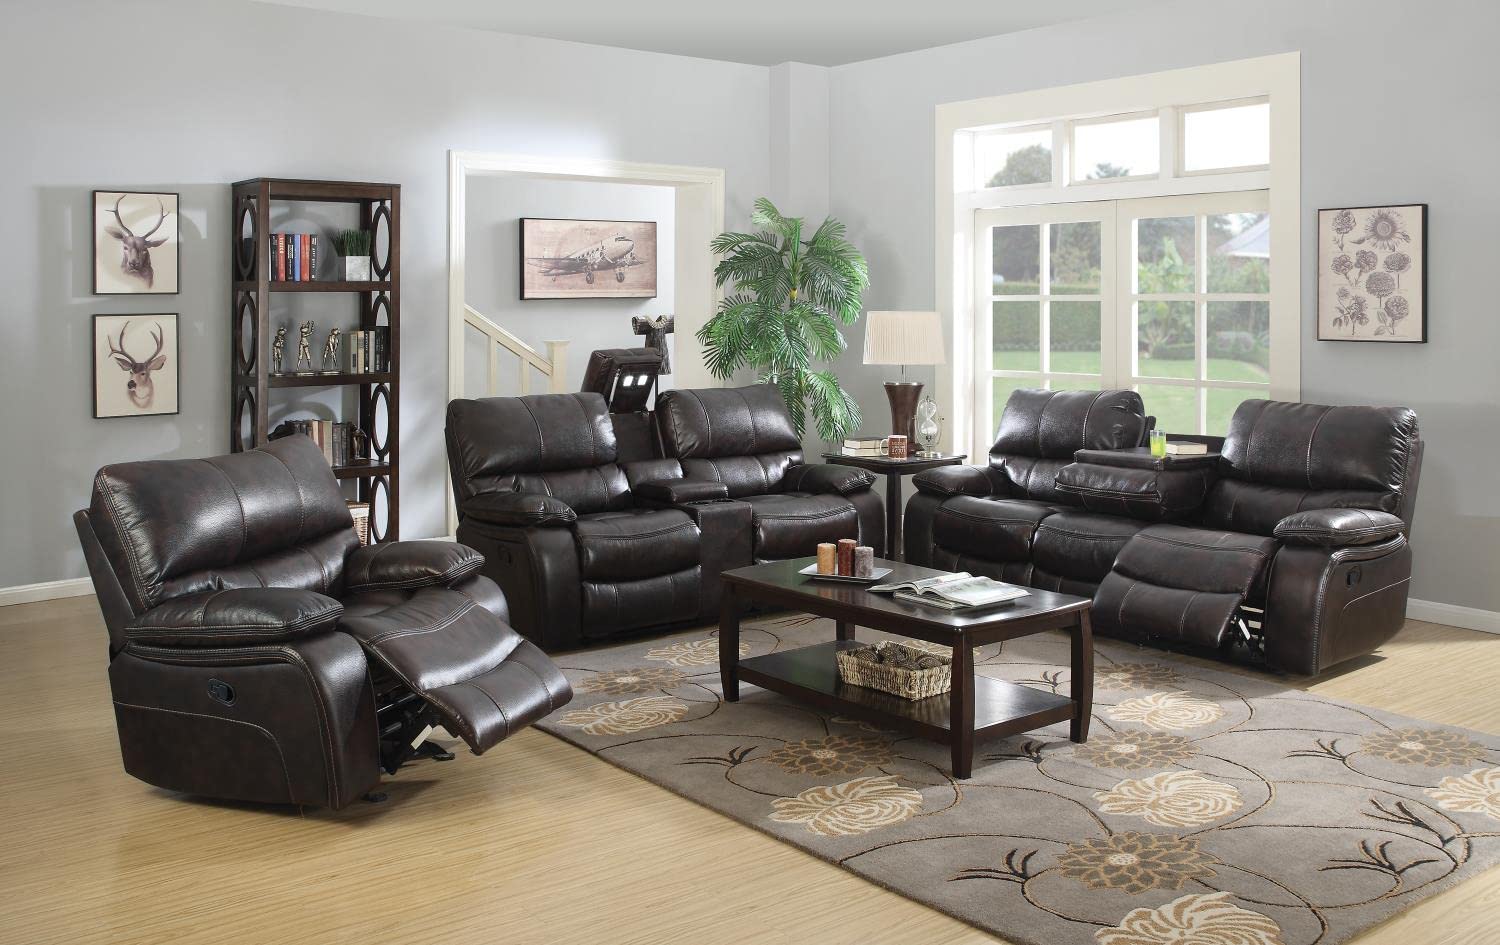 Coaster Home Furnishings Willemse Motion Sofa with Drop-Down Table Dark Brown